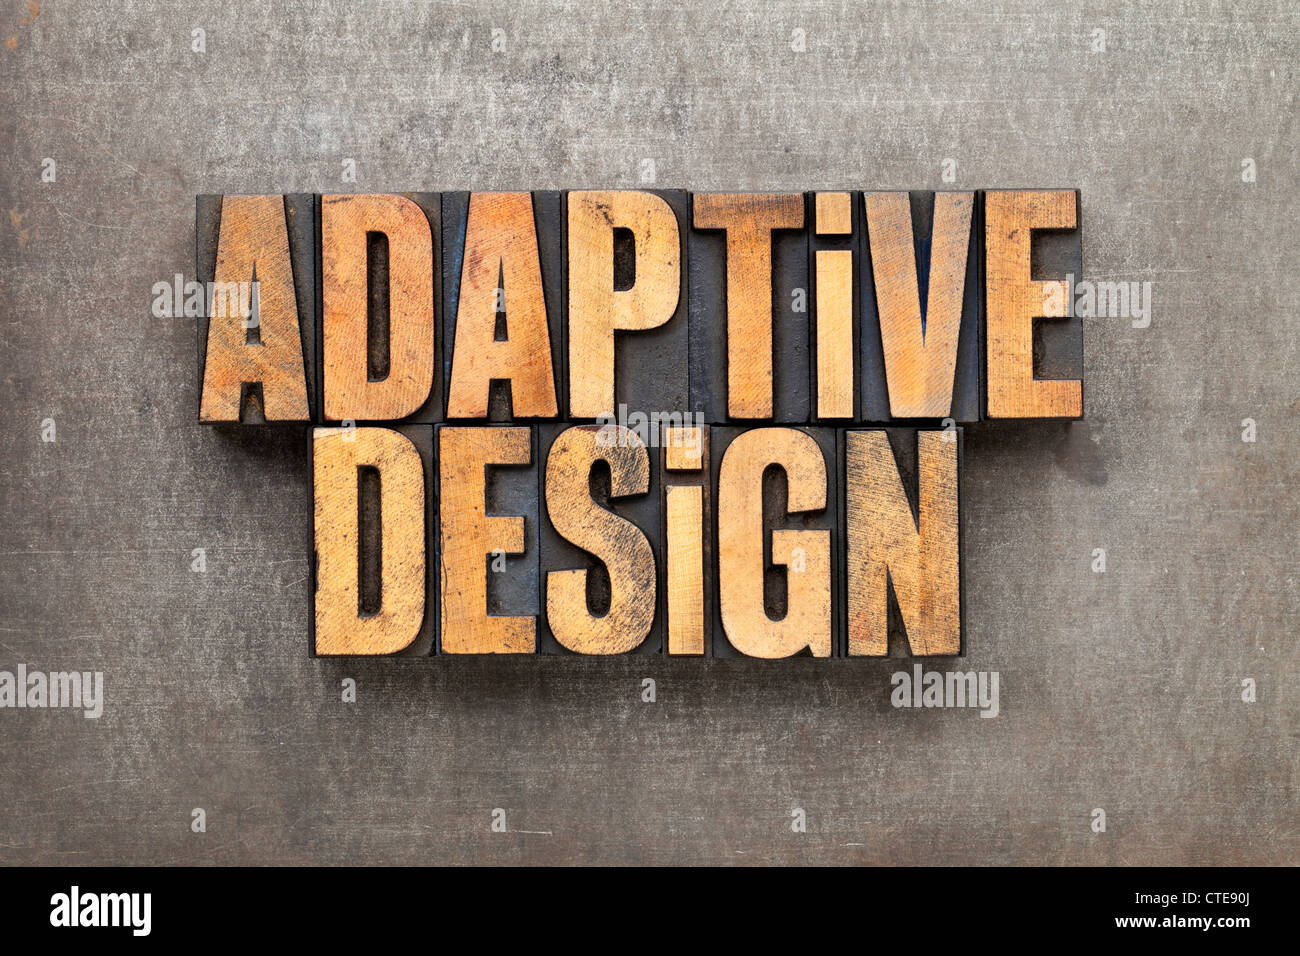 adaptive design - text in vintage letterpress wood type against grunge metal surface Stock Photo